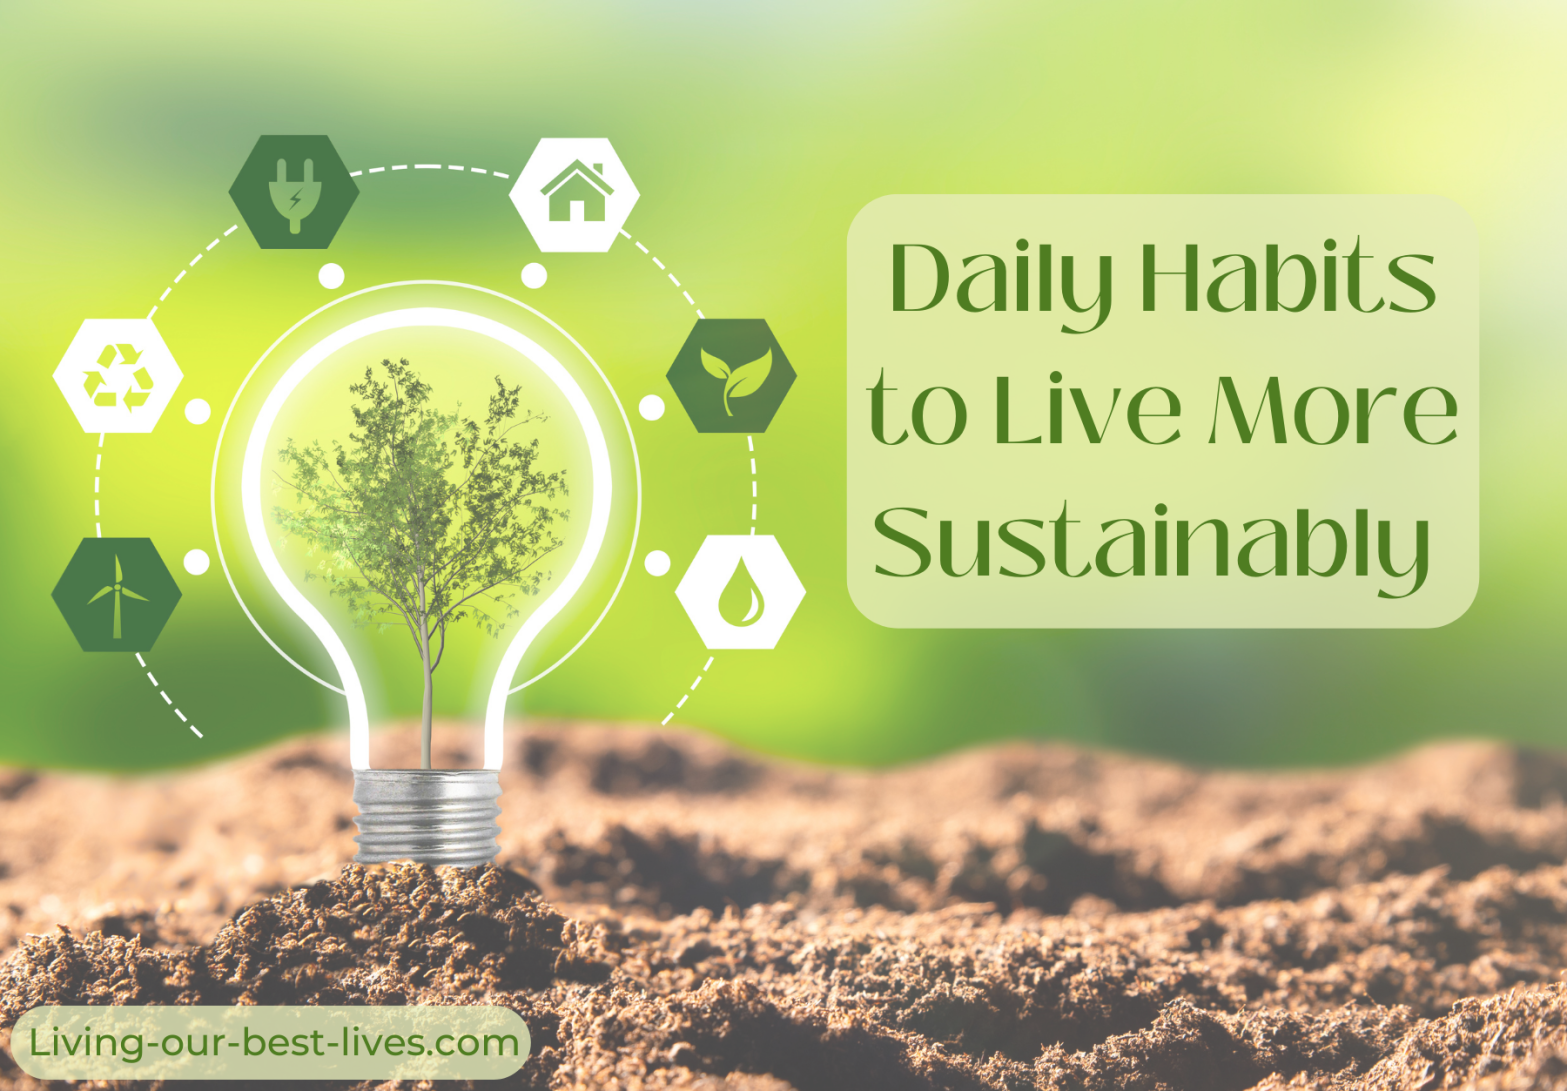 Daily habits to live more sustainably